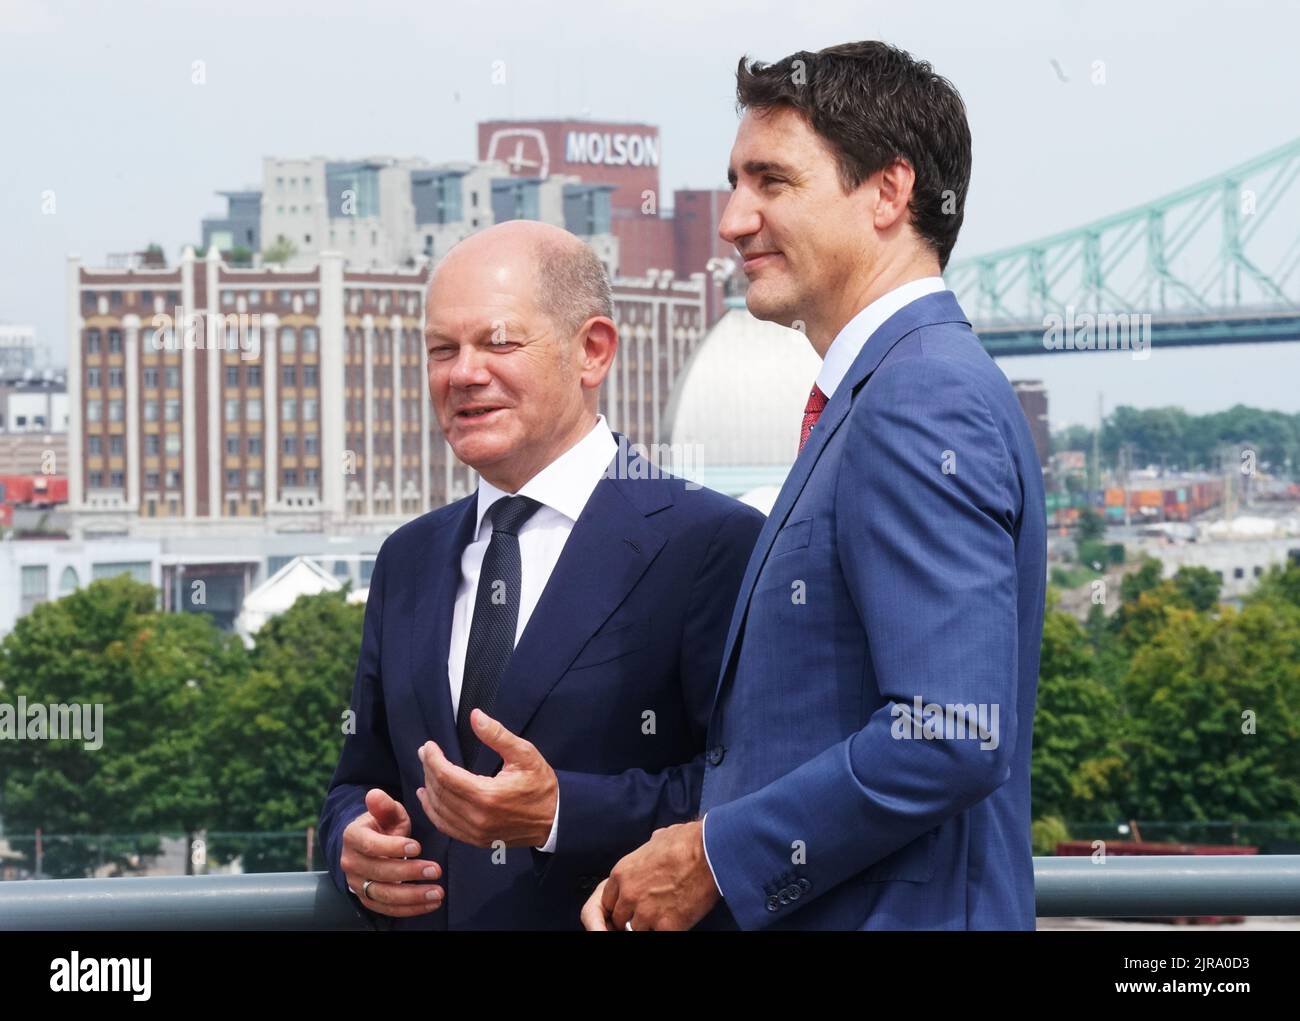 Montreal,Quebec,Canada,August 22,2022.Chancellor Olaf Schotz and Prime Minister Justin Trudeau at a press conference.Mario Beauregard/Alamy News Stock Photo